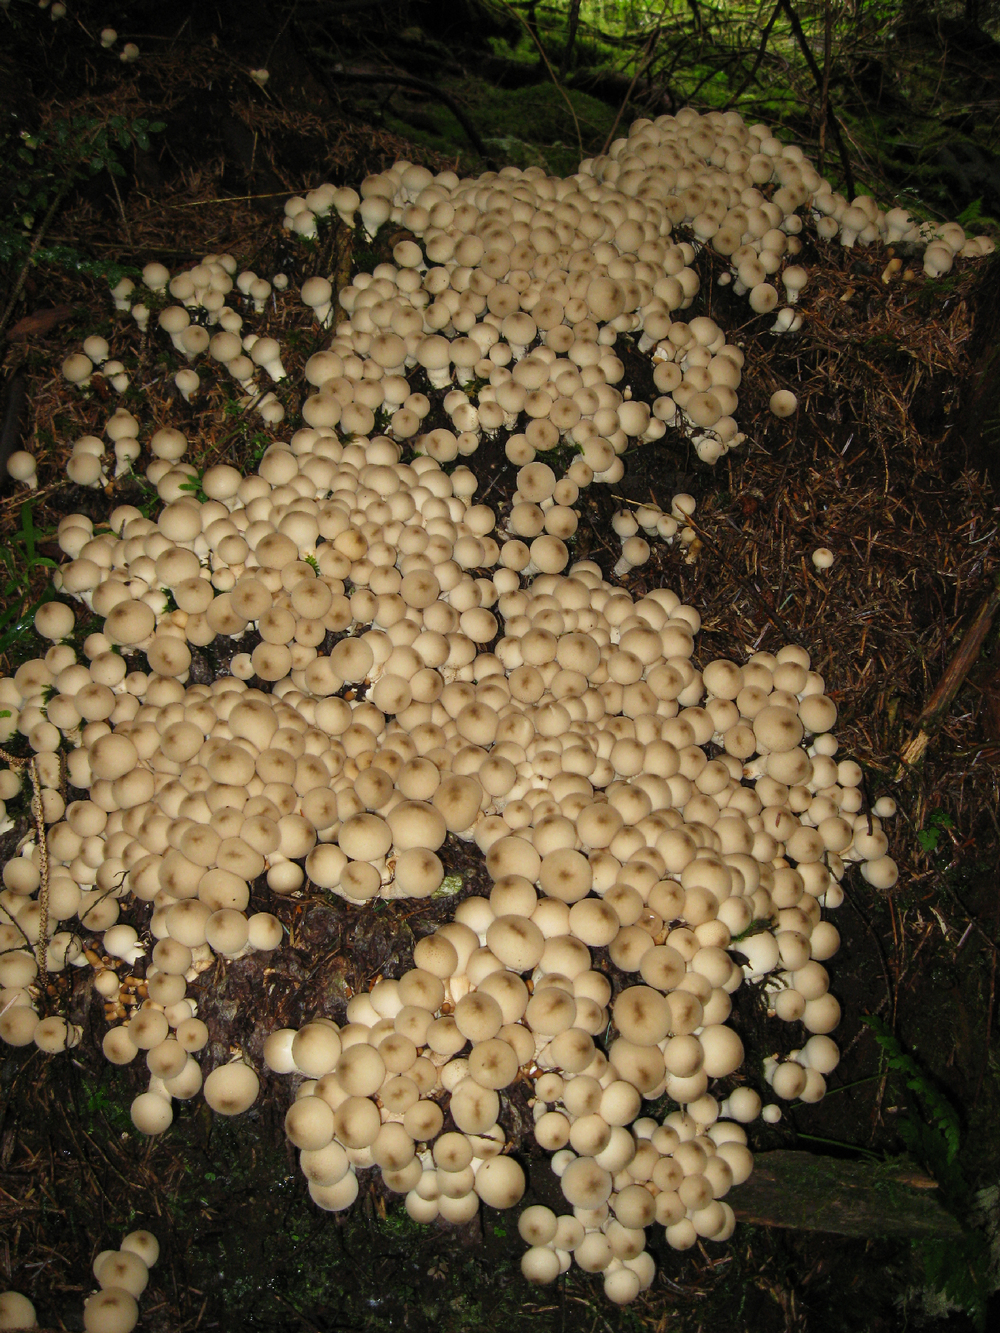 Pear shaped puffballs in the forest.